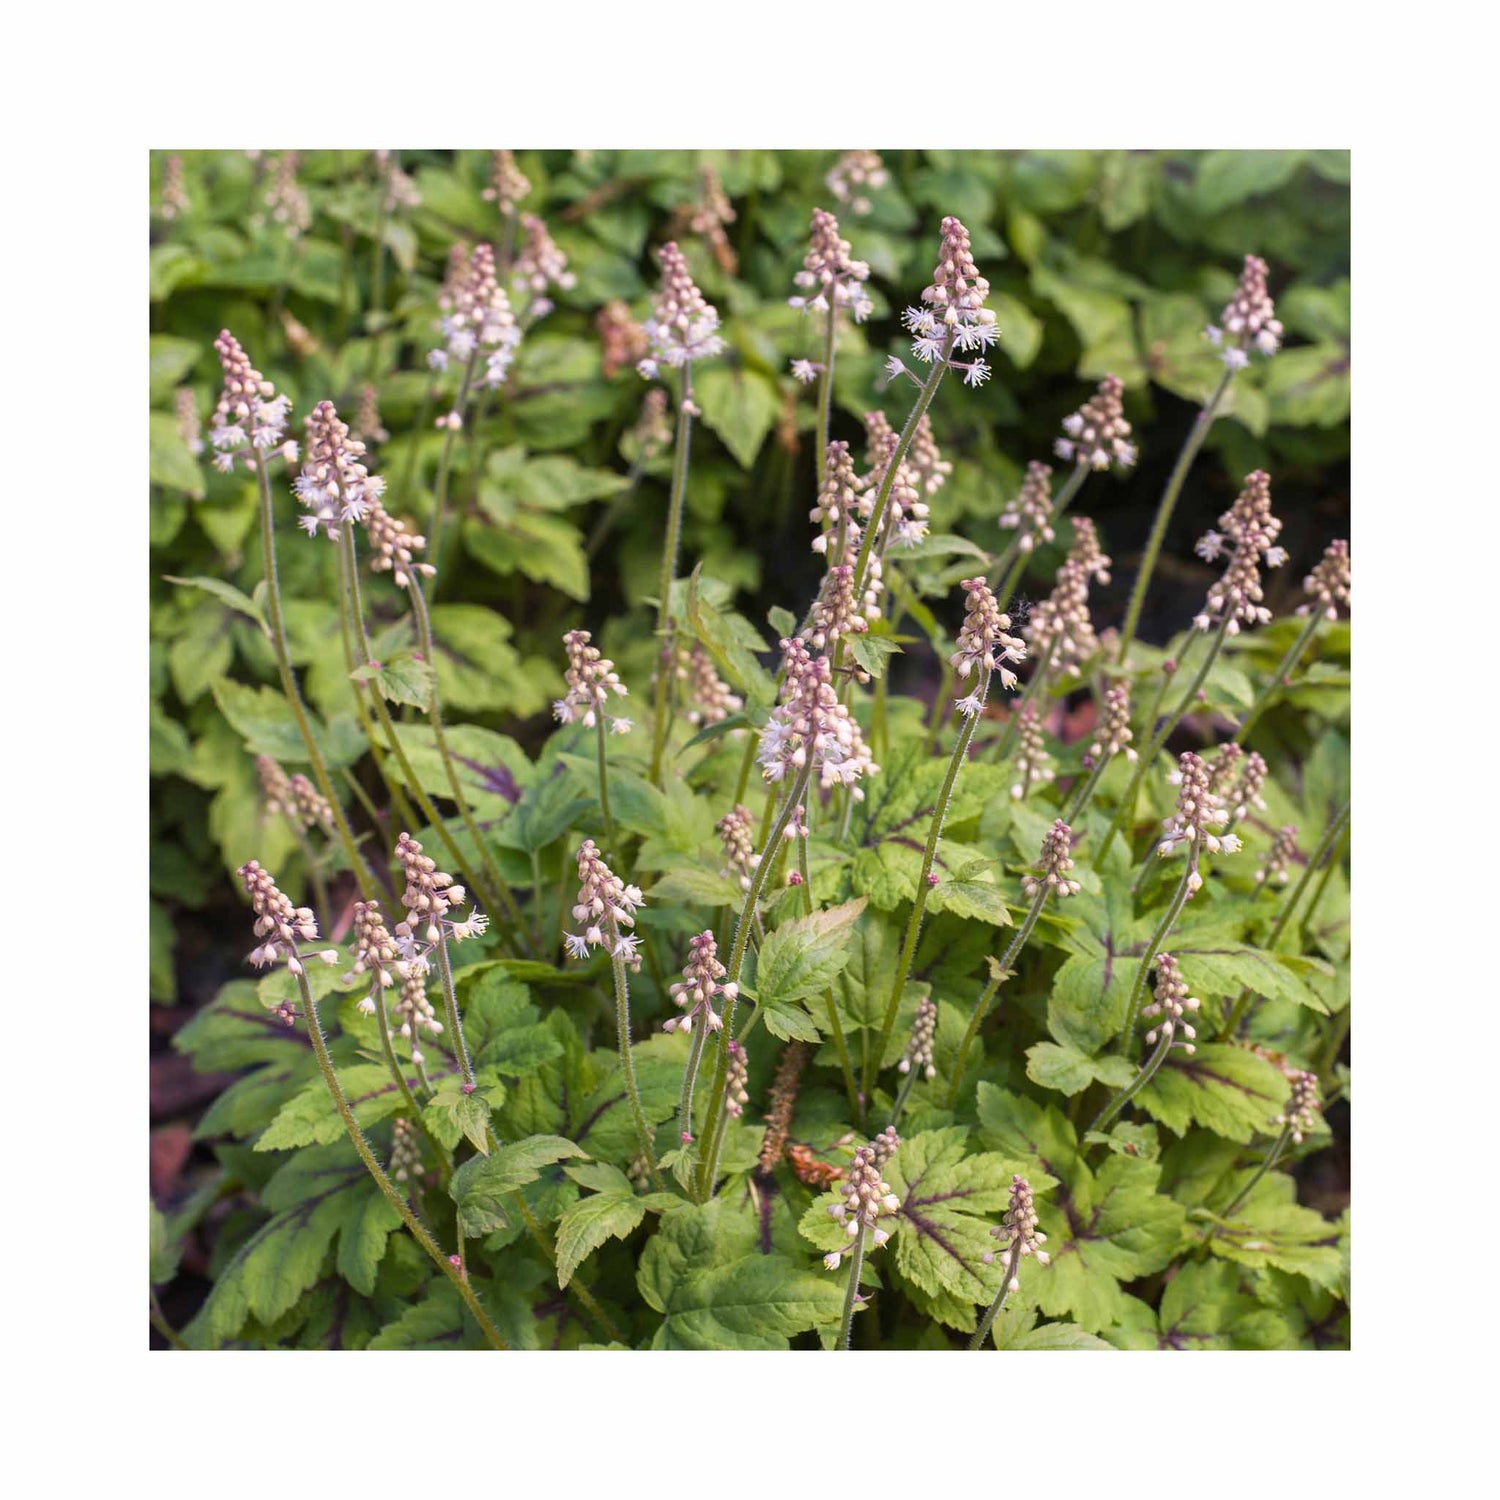 Light white and pink flowers of Tiarella Sugar and Spice